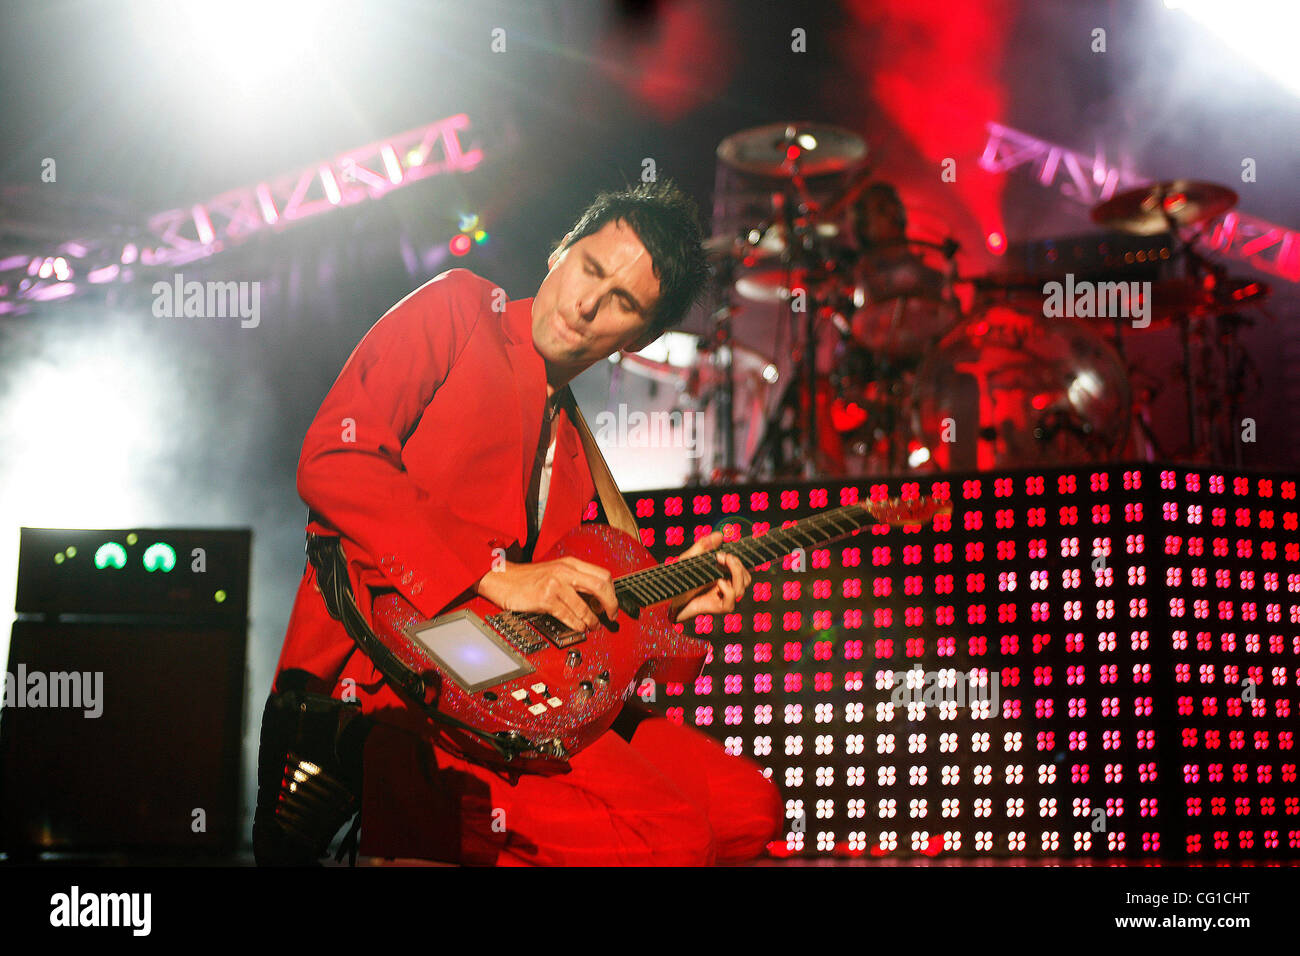 Muse performing at Madison Square Garden on August 6, 2007. Matthew Bellamy  on vocals in red suit Christopher Wolstenholme on bass Dominic Howard on  drums Photo Credit; Rahav Segev for The New